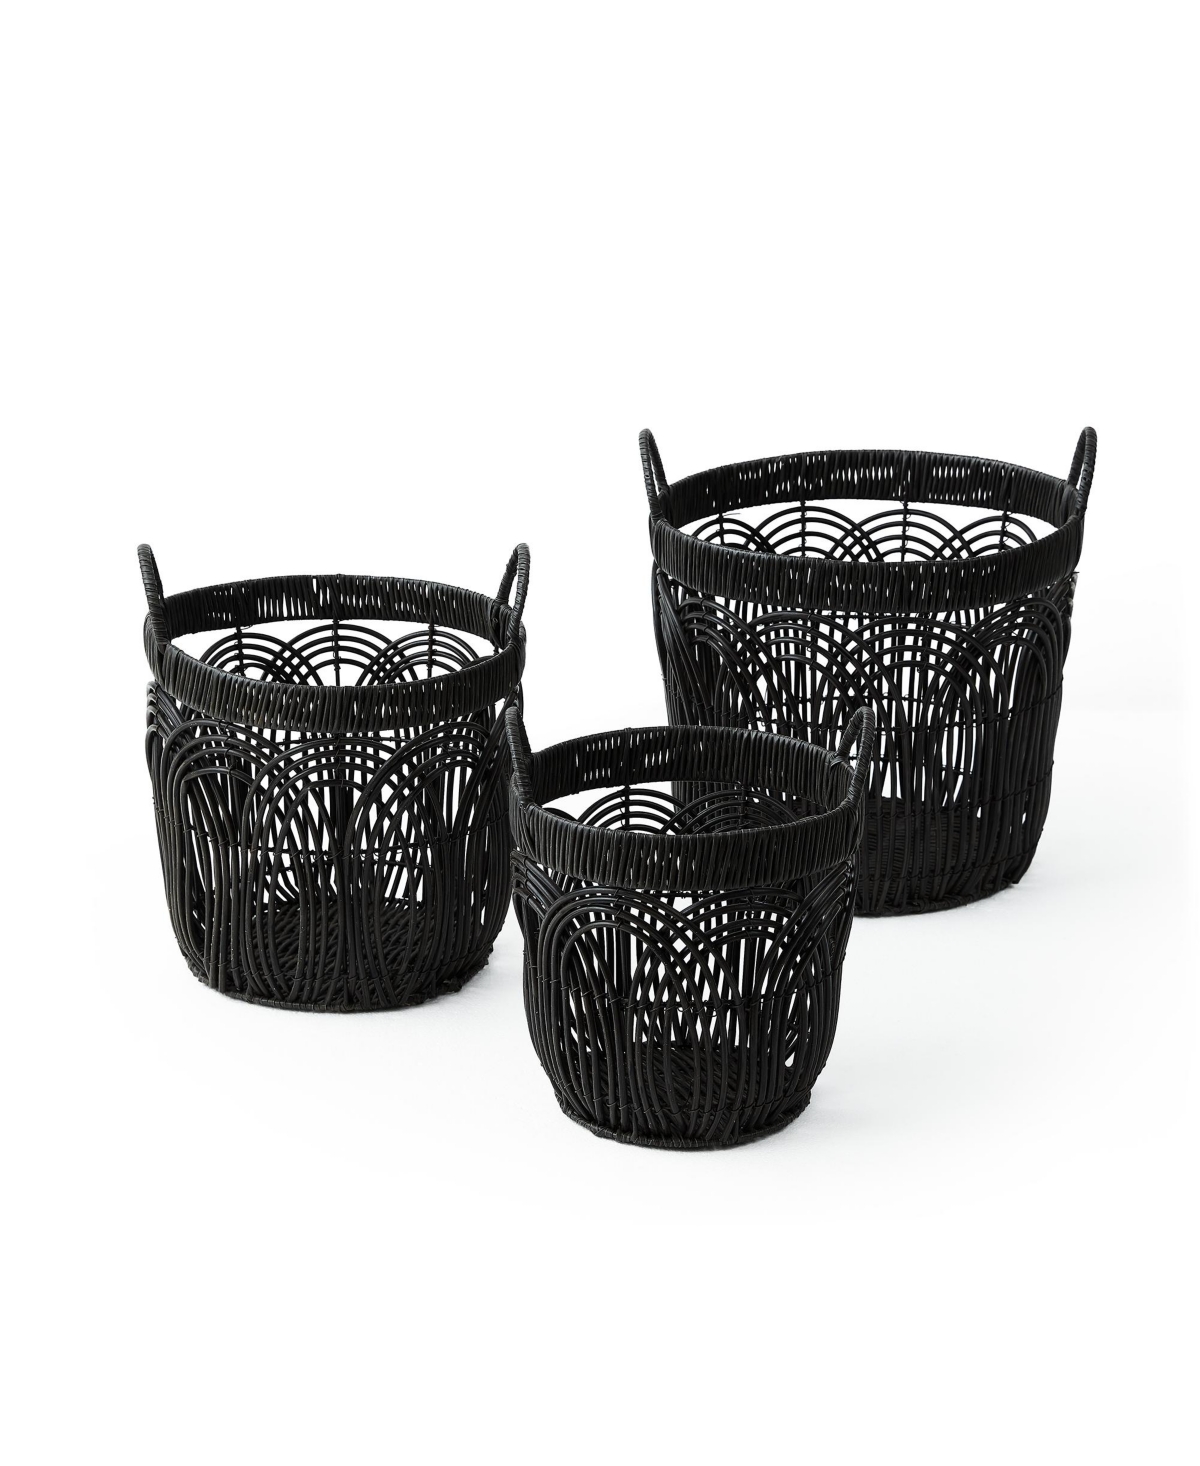 3 Piece Round Faux Wicker Weave Set with Ear Handles - Black